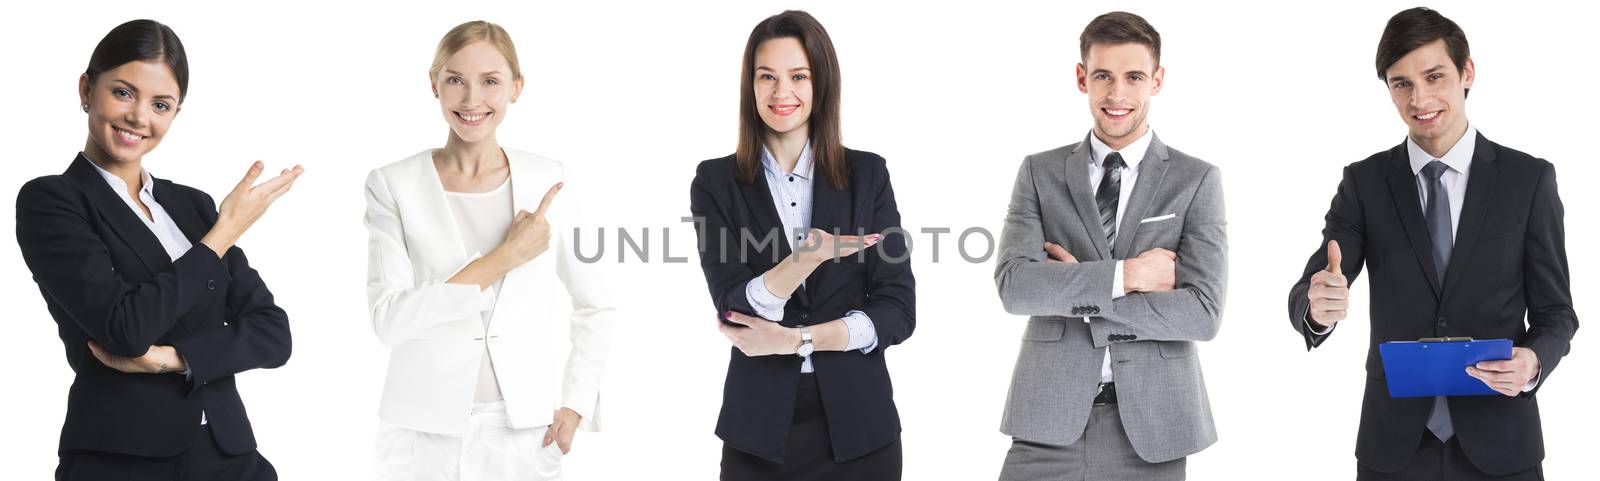 Set of positive business people isolated on white background